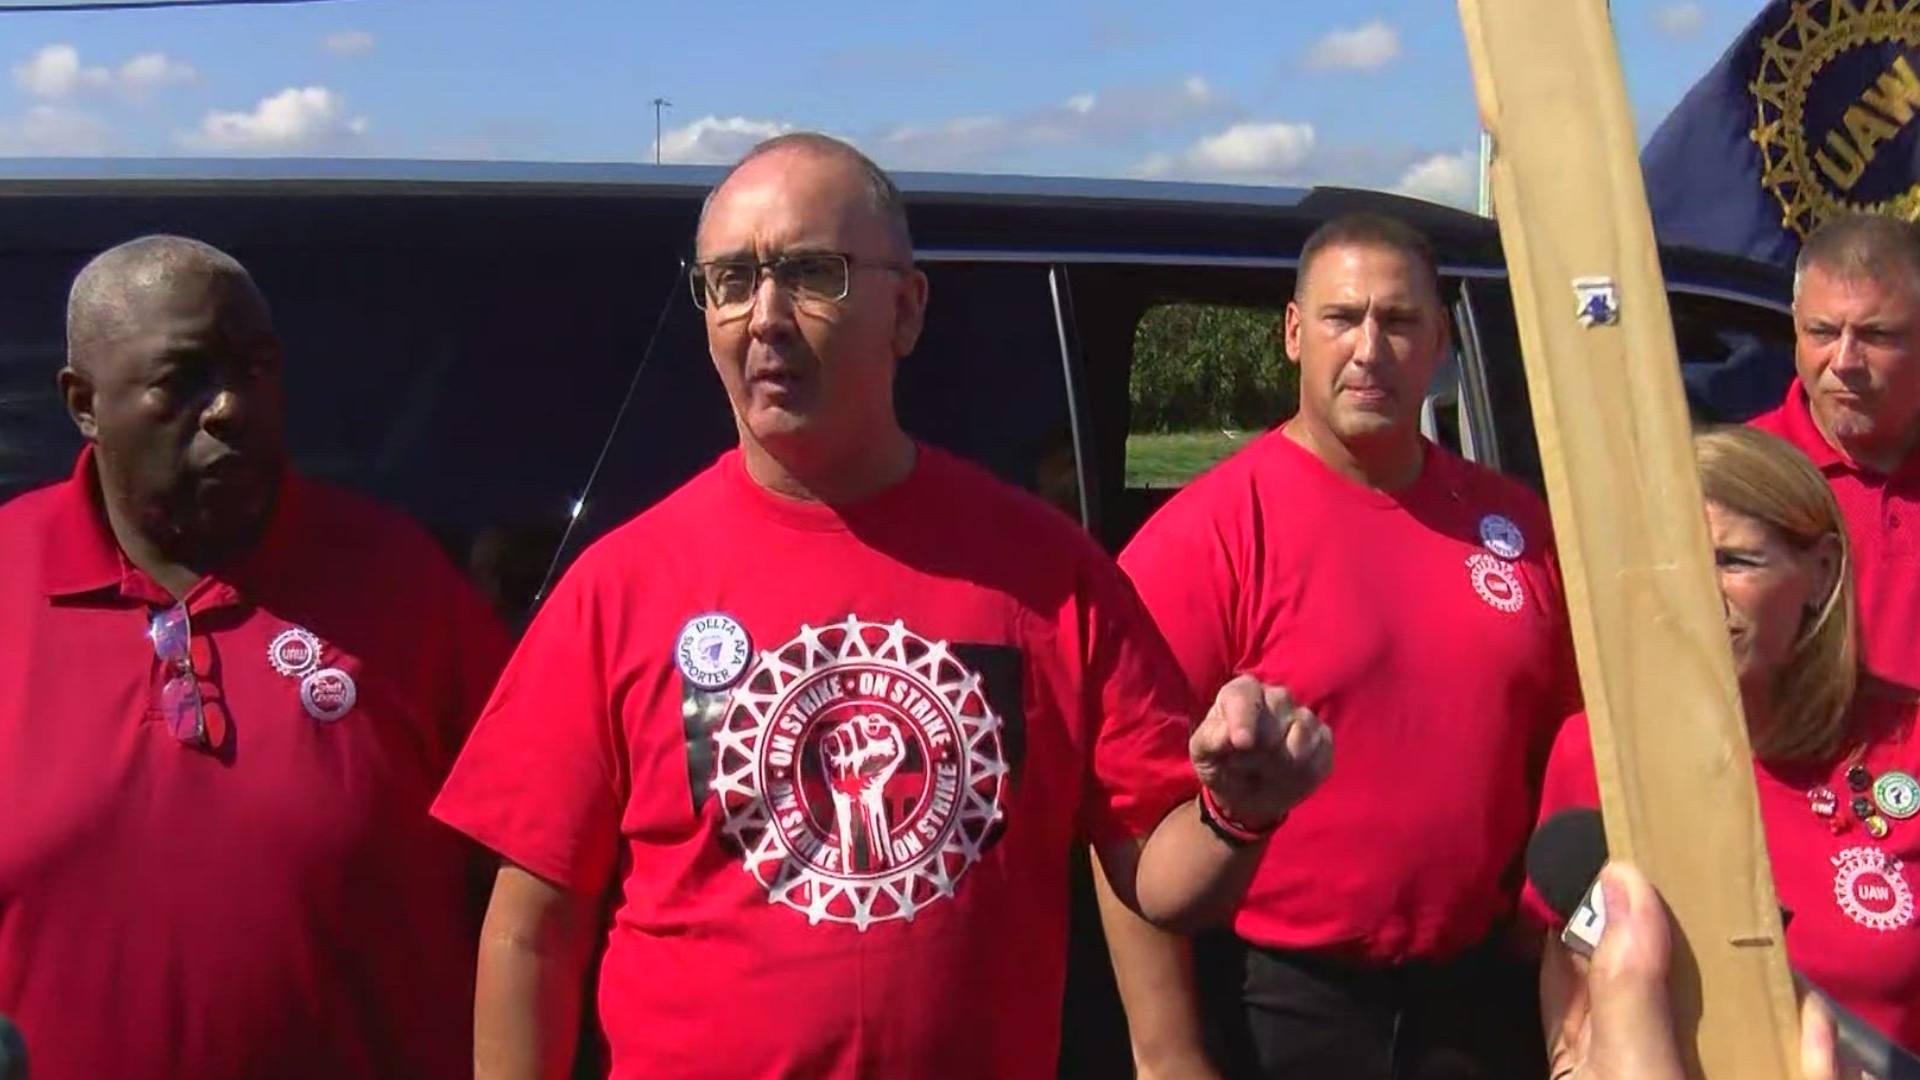 UAW President Shawn Fain's presence at the Toledo Jeep Assembly Complex comes the day after the third expansion of the UAW's strike against the Big Three.